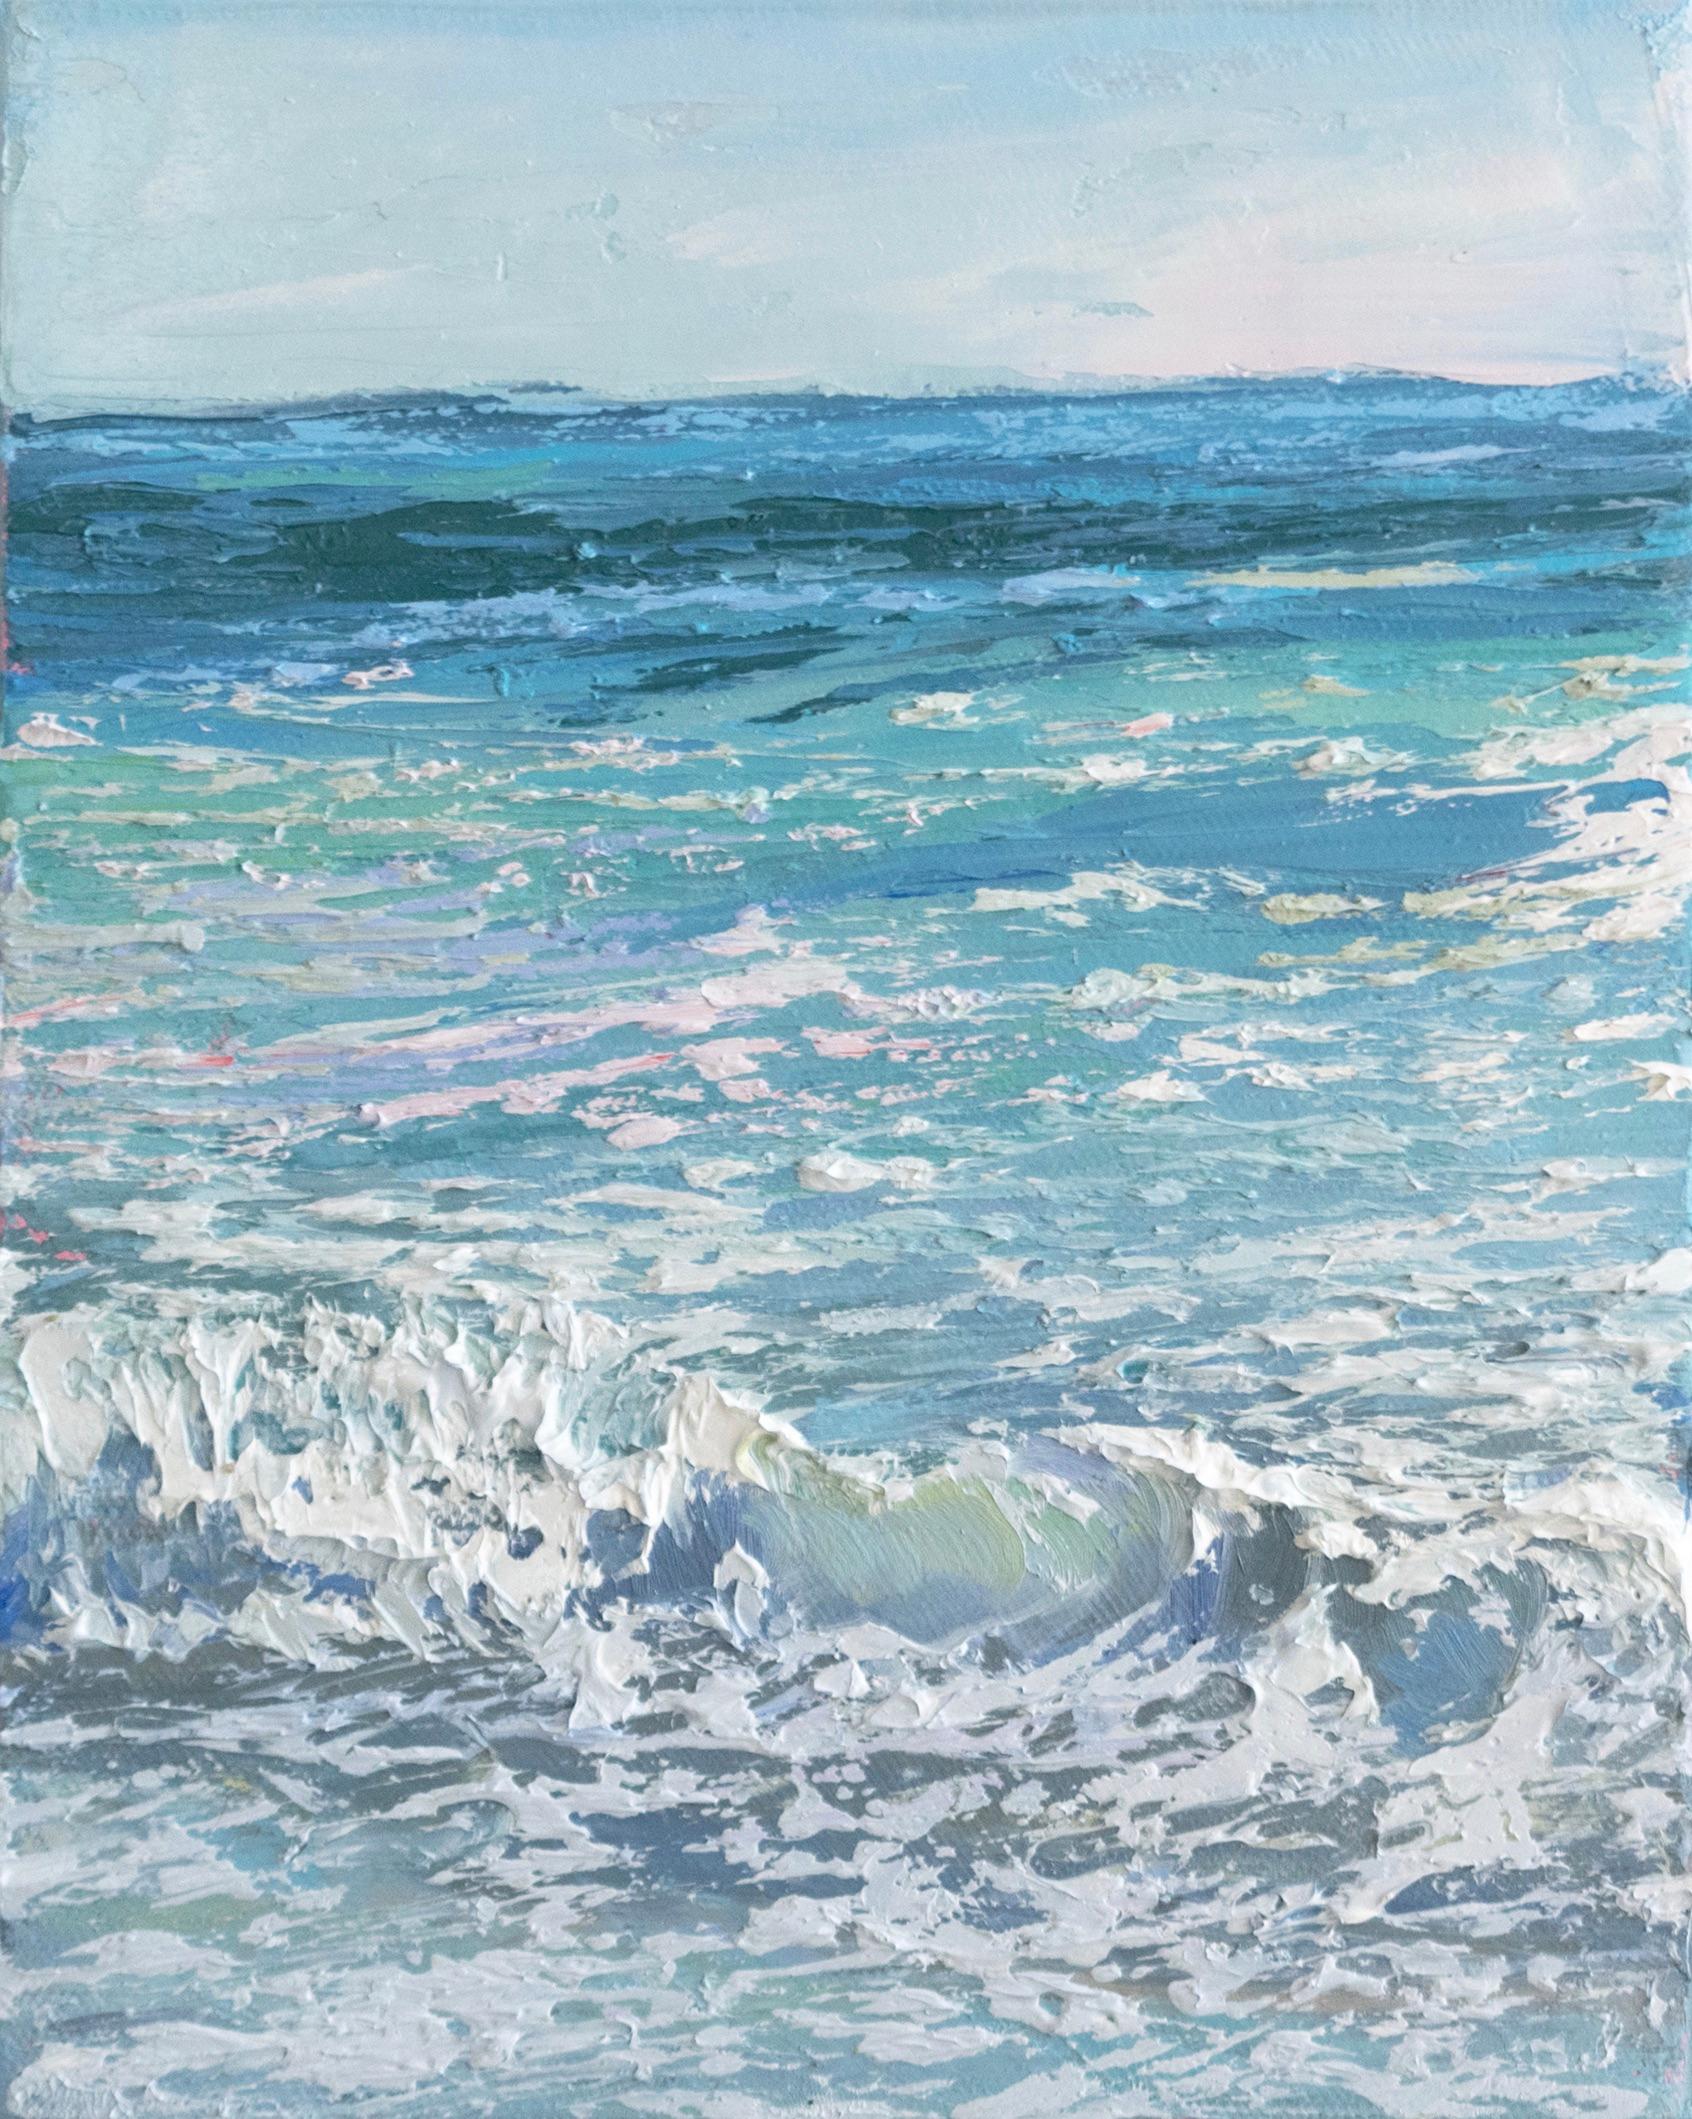 Annie Wildey Landscape Painting - "Crystal Surf I" small scale oil painting of teal blue waves with white sea foam